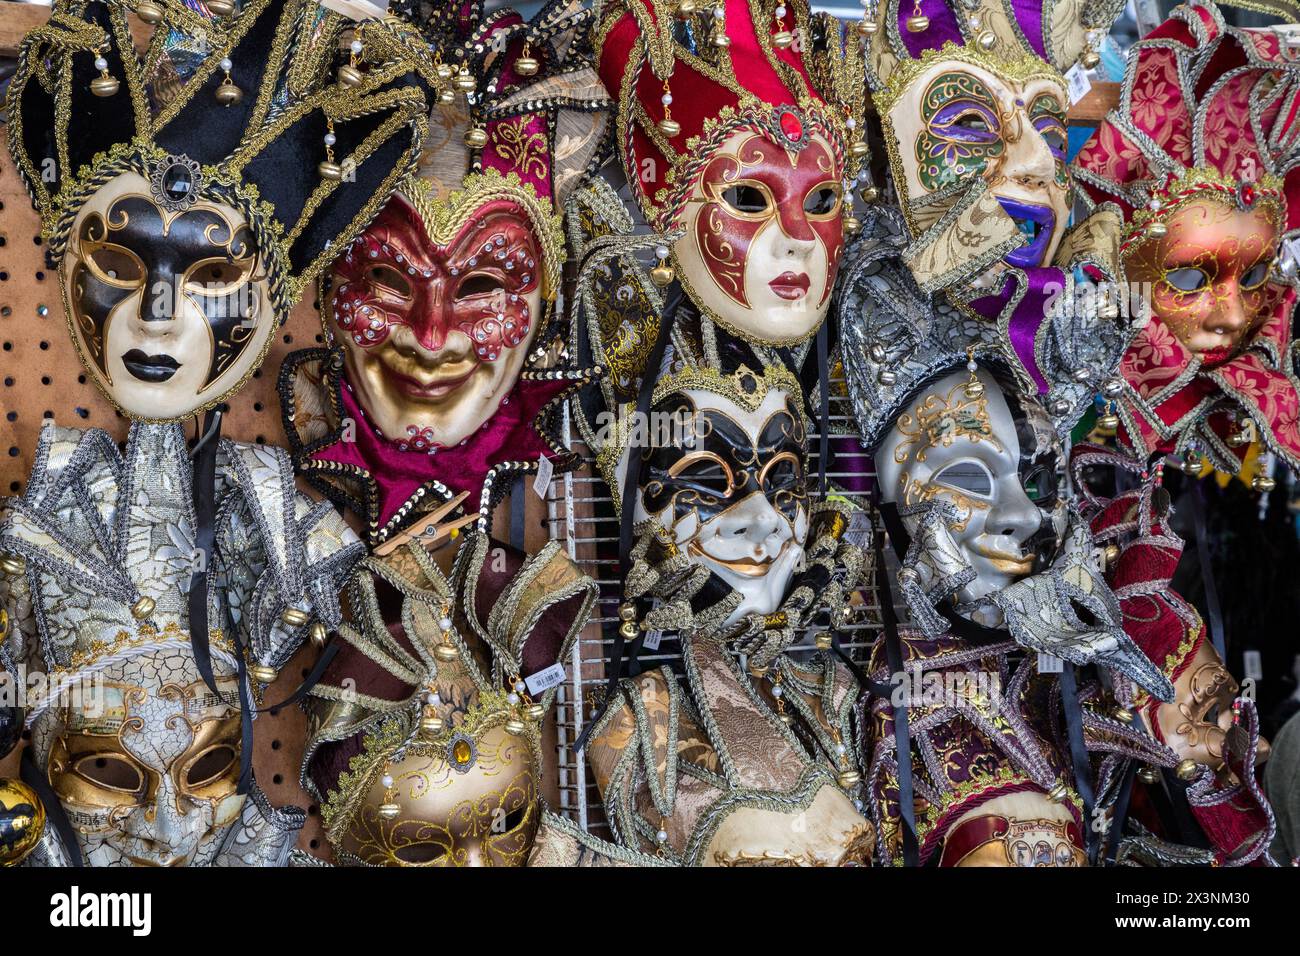 New Orleans, Louisiana. French Quarter, Mardi Gras Masks for Sale in the French Market. Stock Photo